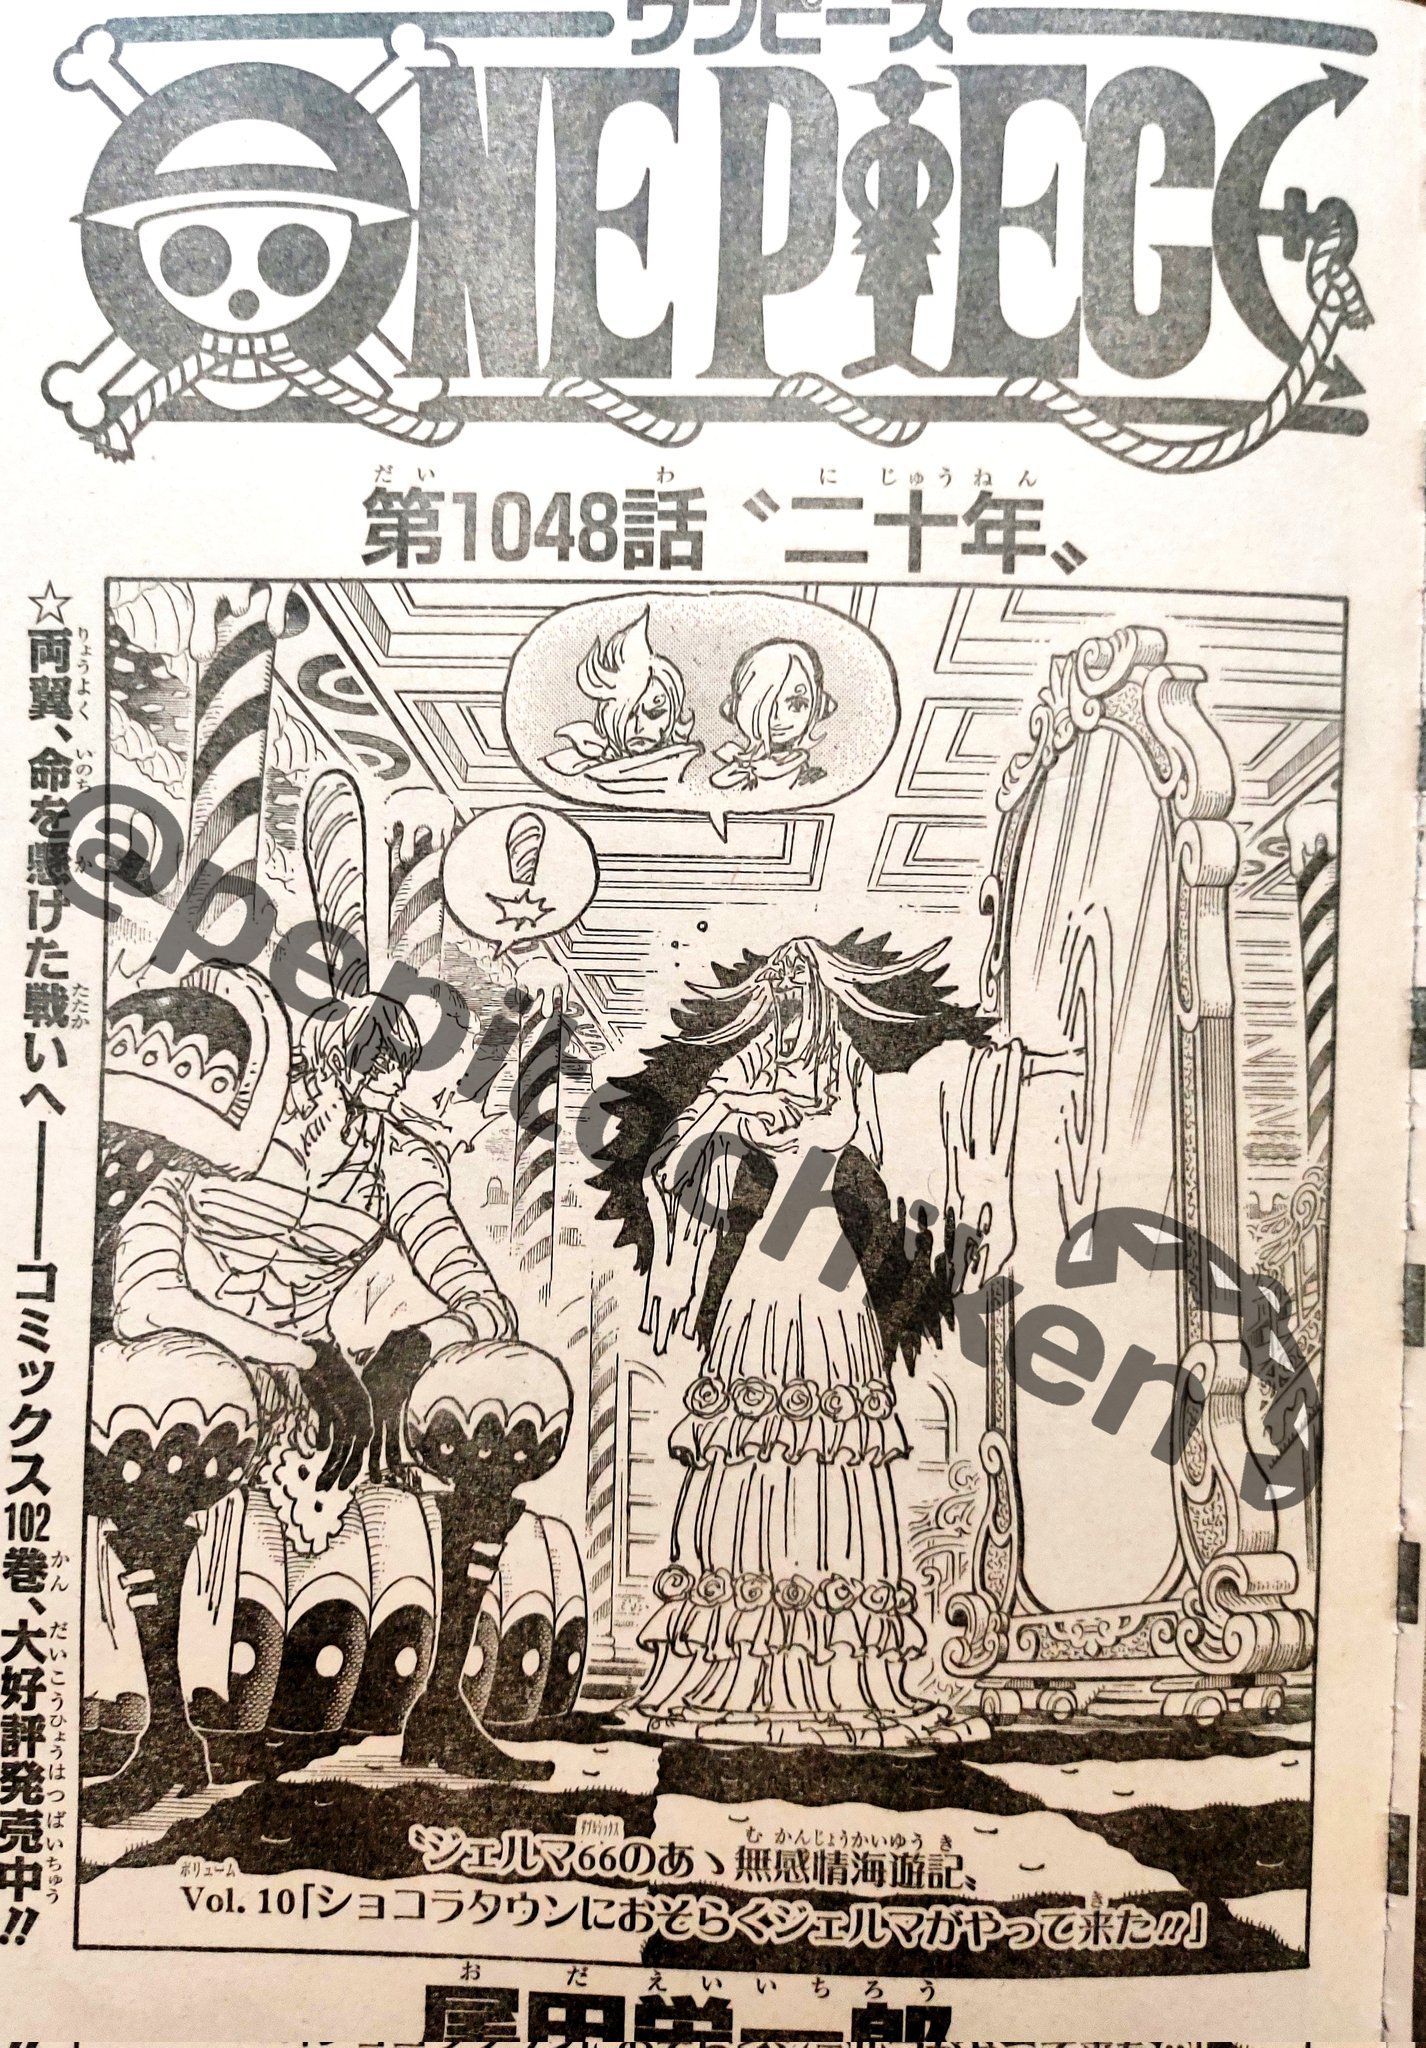 Cover One Piece chapter 1048